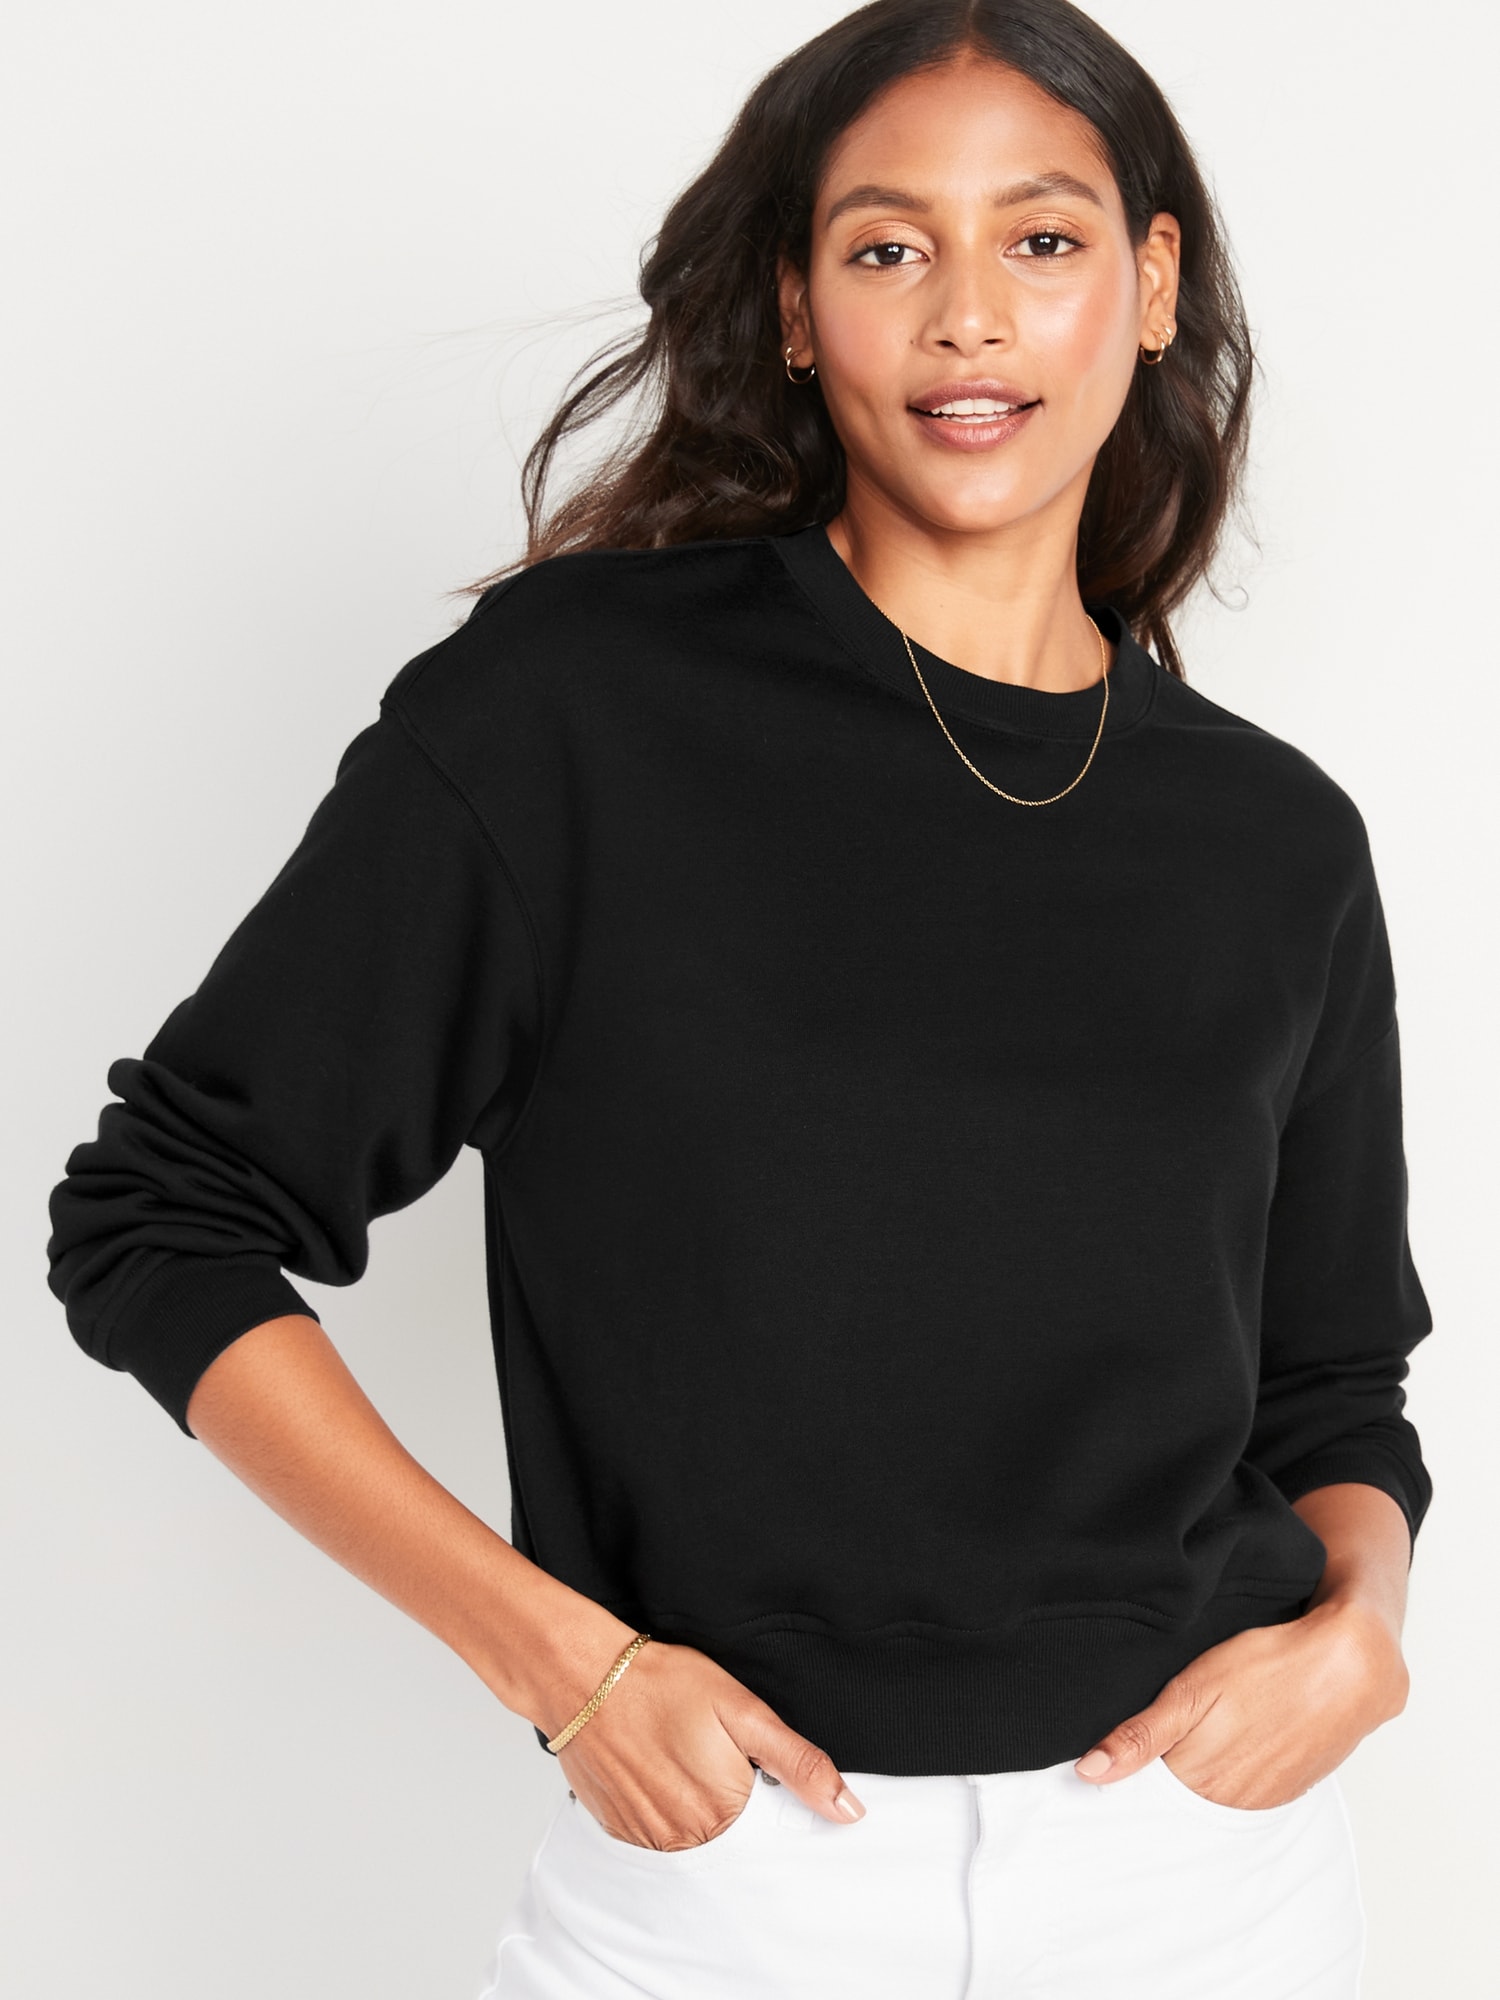 Old Navy Cropped Vintage French-Terry Sweatshirt for Women black. 1